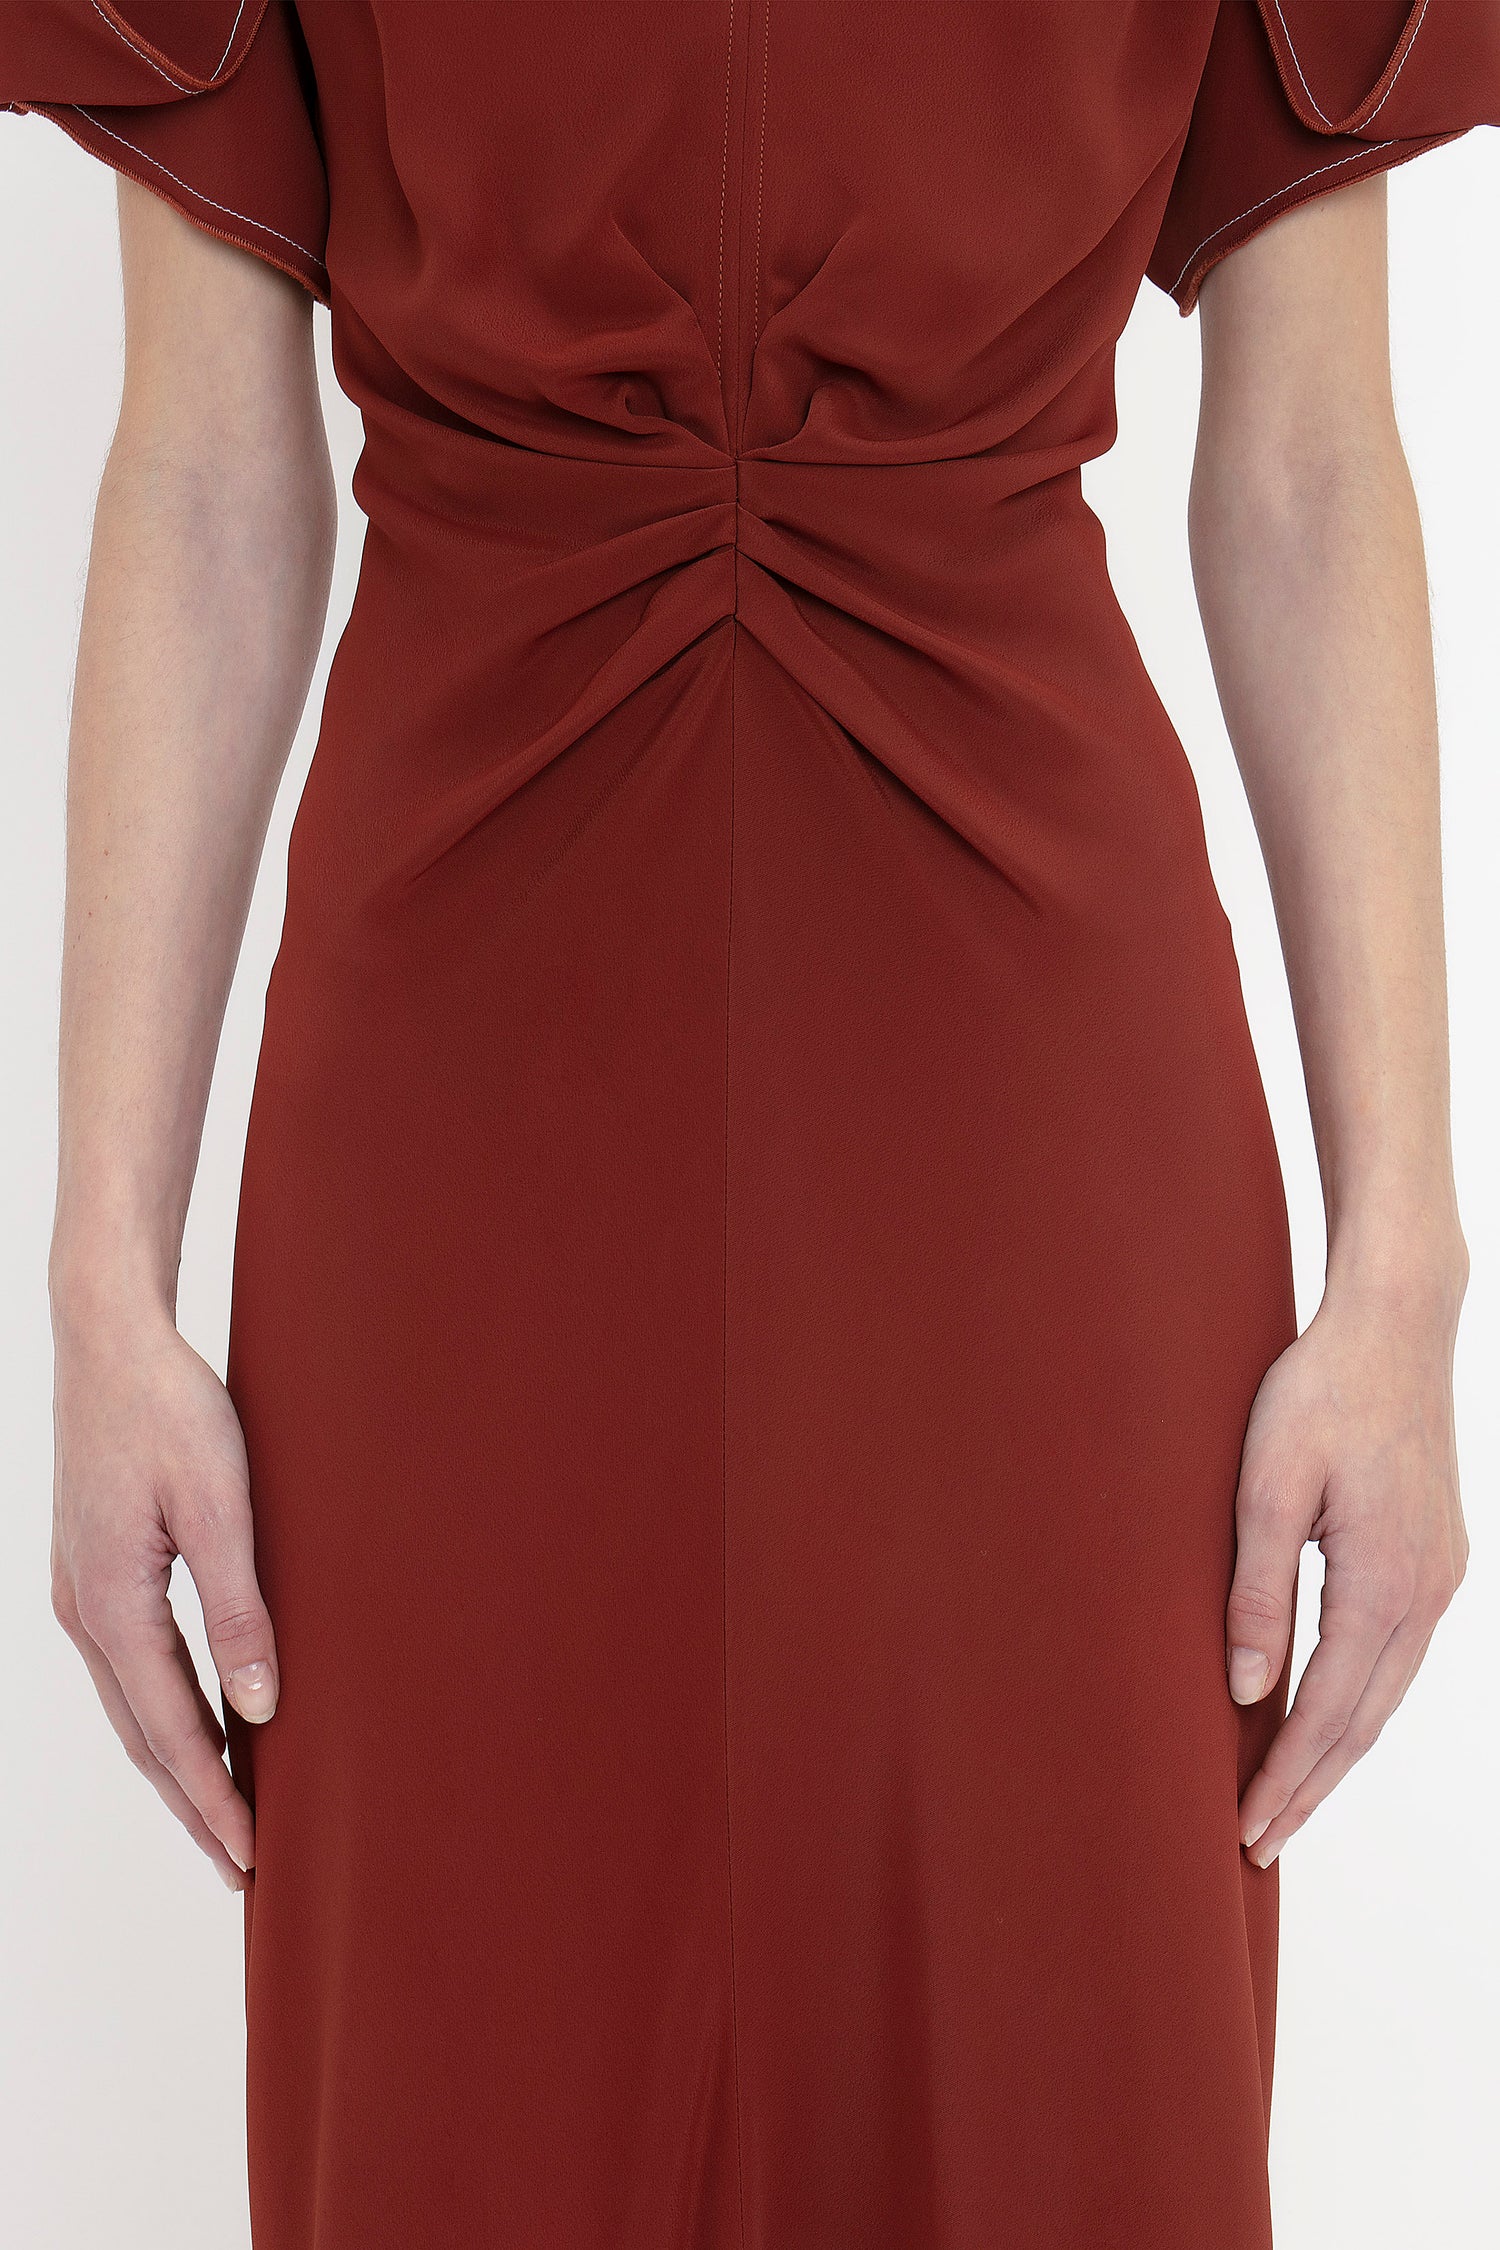 A person wearing a Gathered V-Neck Midi Dress In Russet by Victoria Beckham, featuring waist-defining pleat detail, with both arms hanging straight down by their sides.